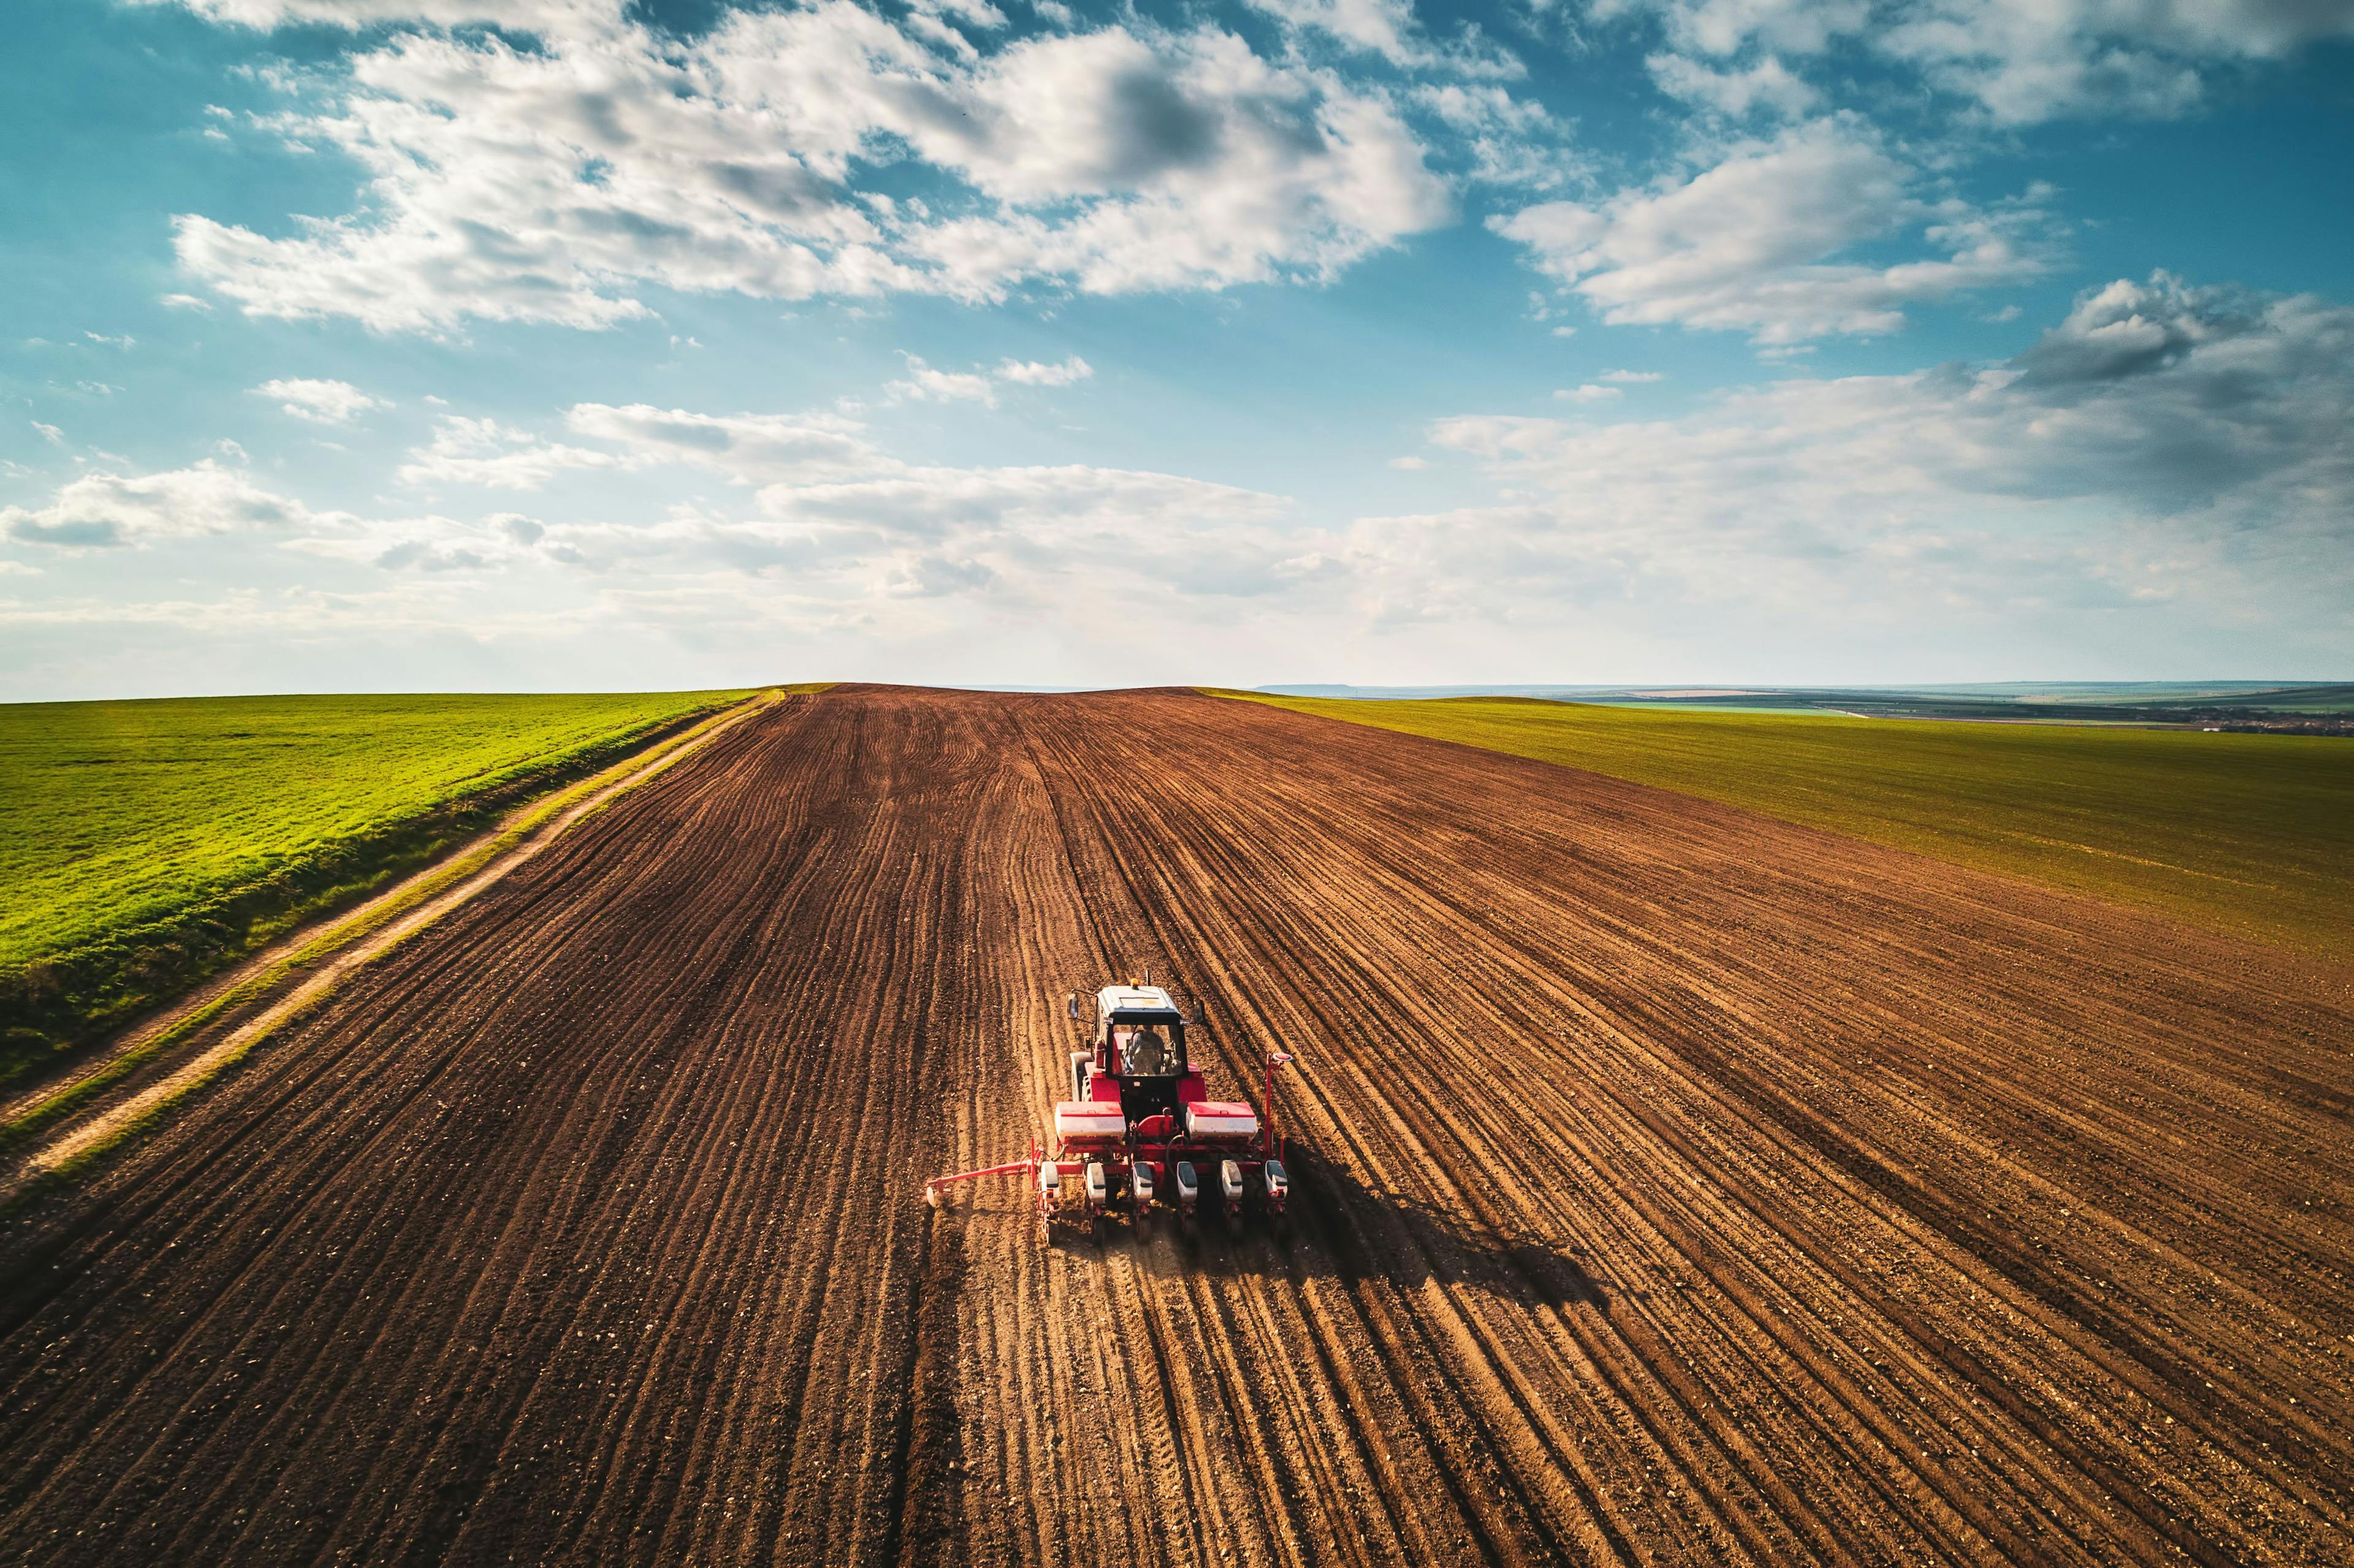 Farmer with tractor seeding crops at field, aerial view | Image Credit: © ValentinValkov - stock.adobe.com.